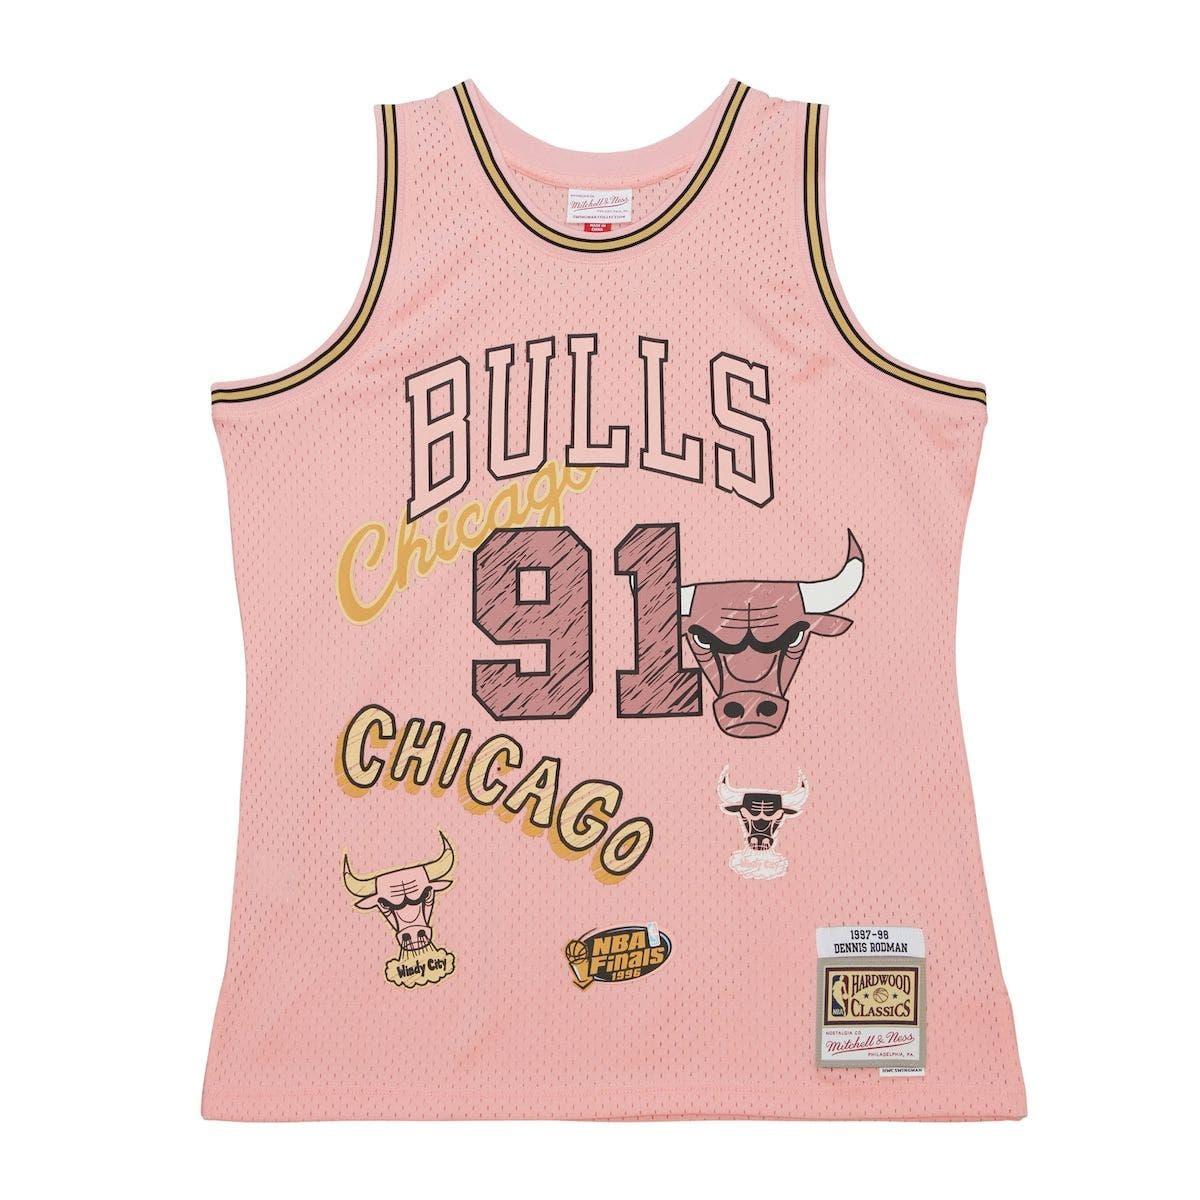 BJ Armstrong Jersey  Chicago Bulls 1990-91 Mitchell & Ness Red Throwback  Swingman Jersey